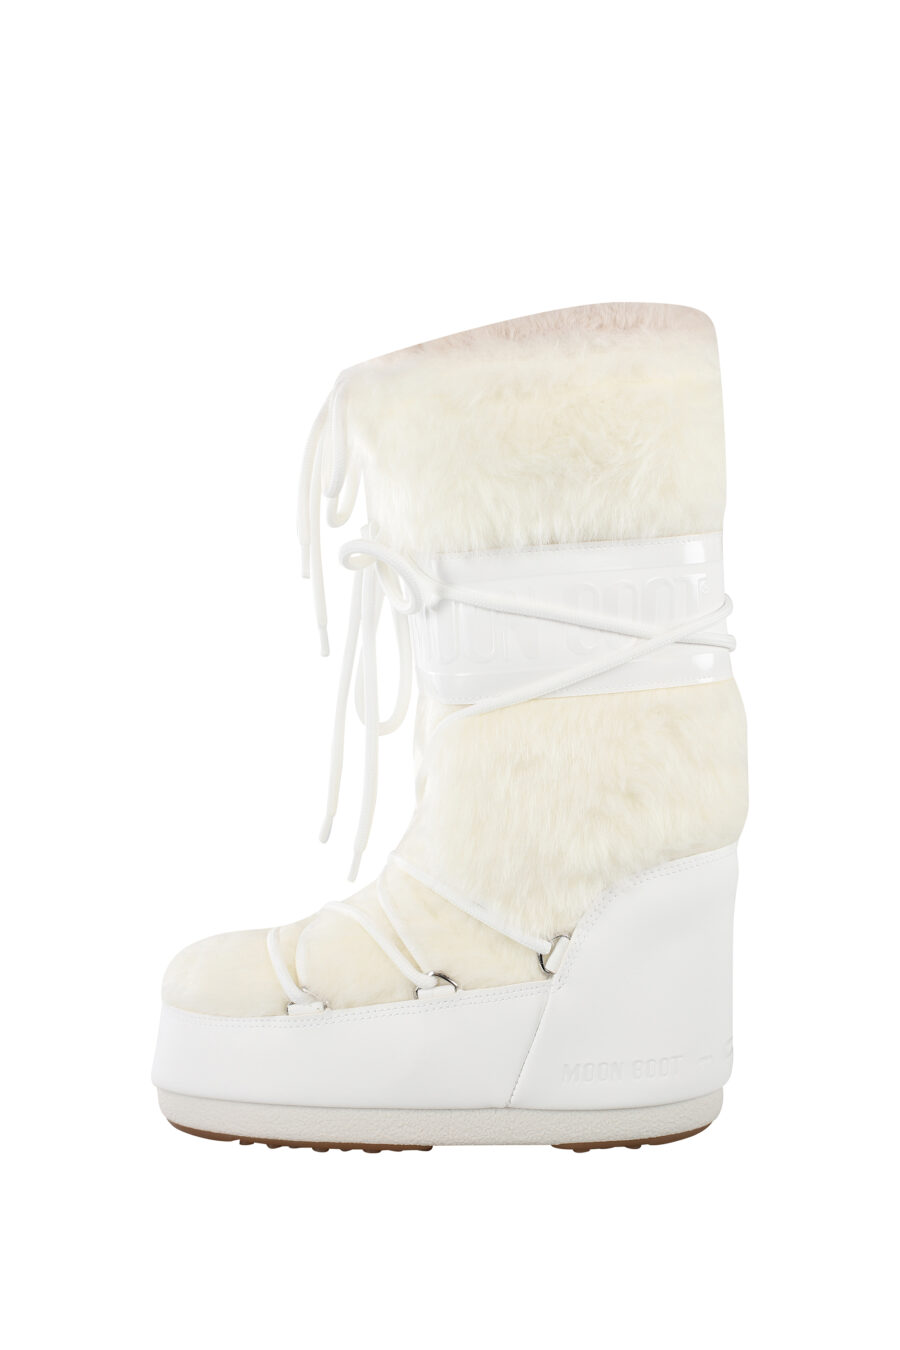 White snow boots with monochrome logo - IMG 6810